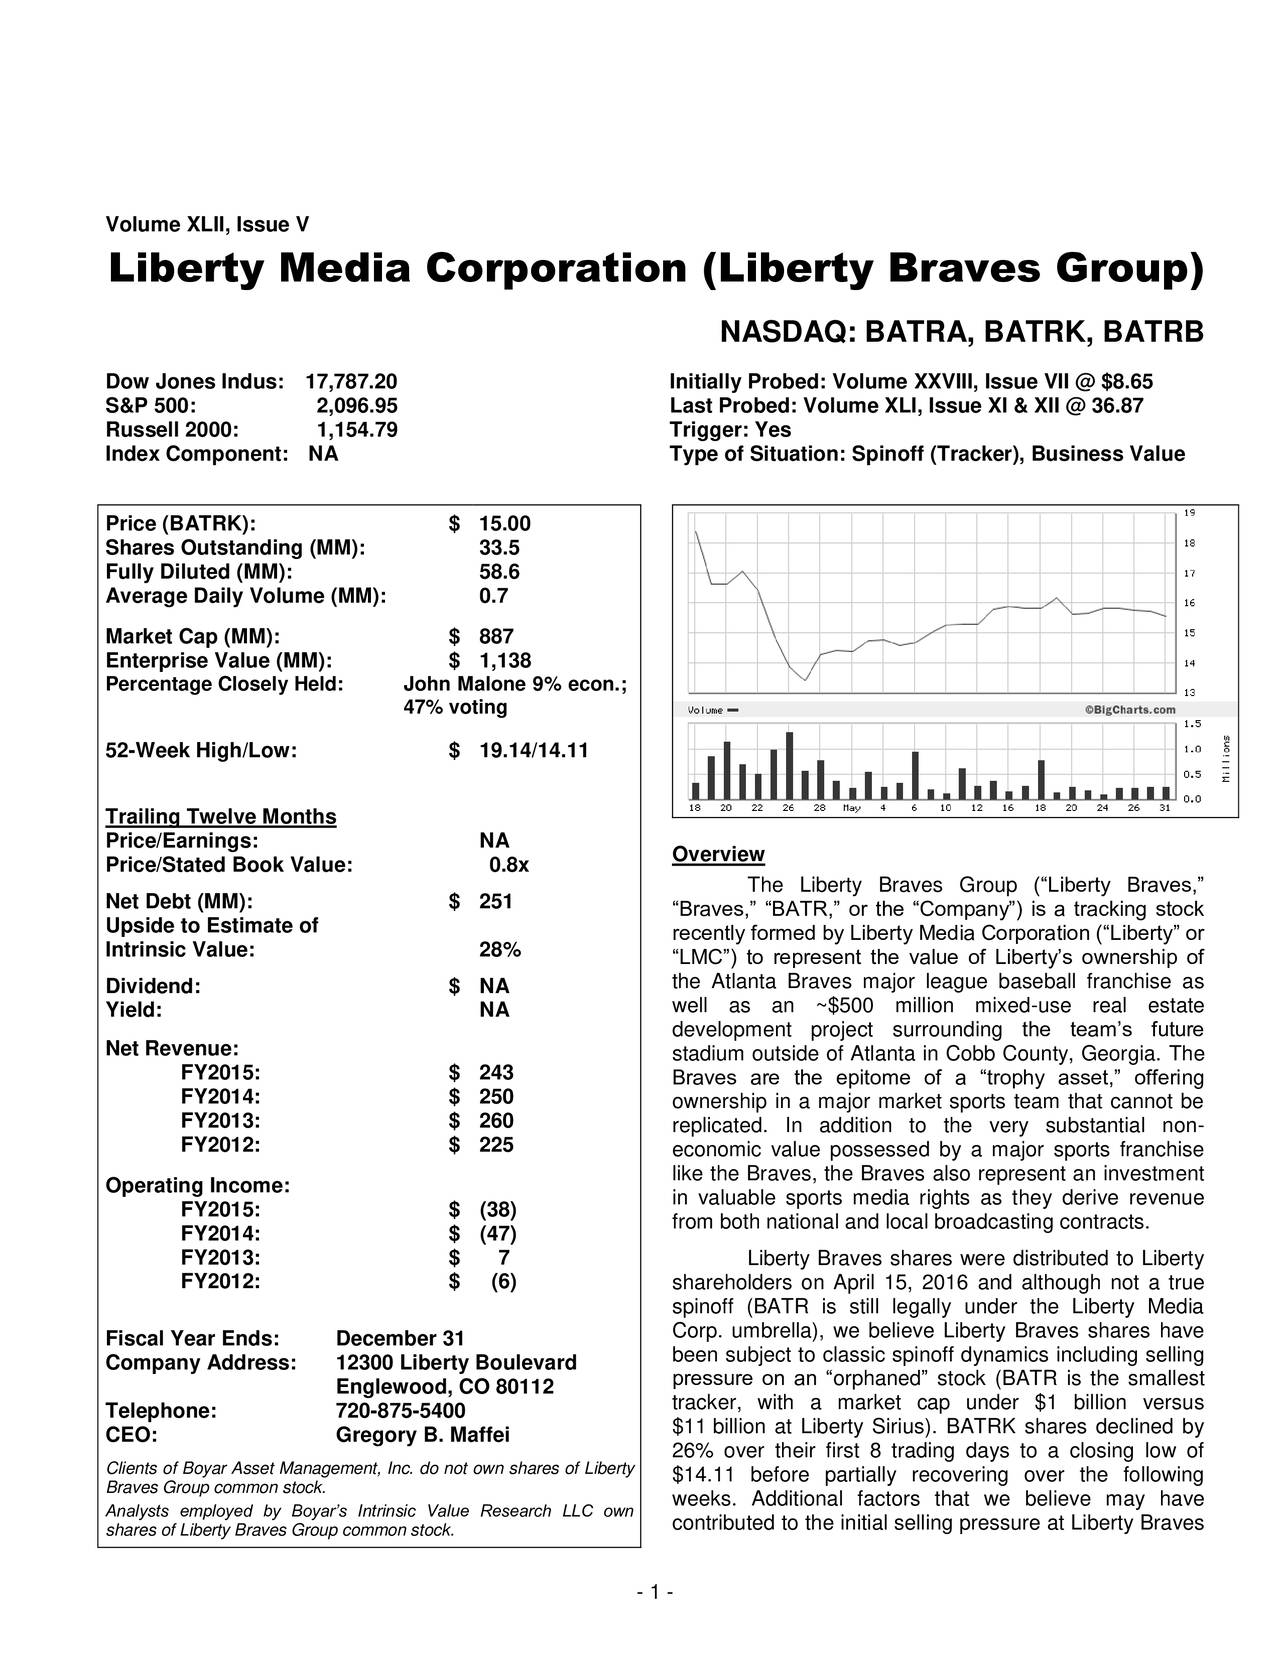 Braves see Q2 2021 revenues approach 2019 levels